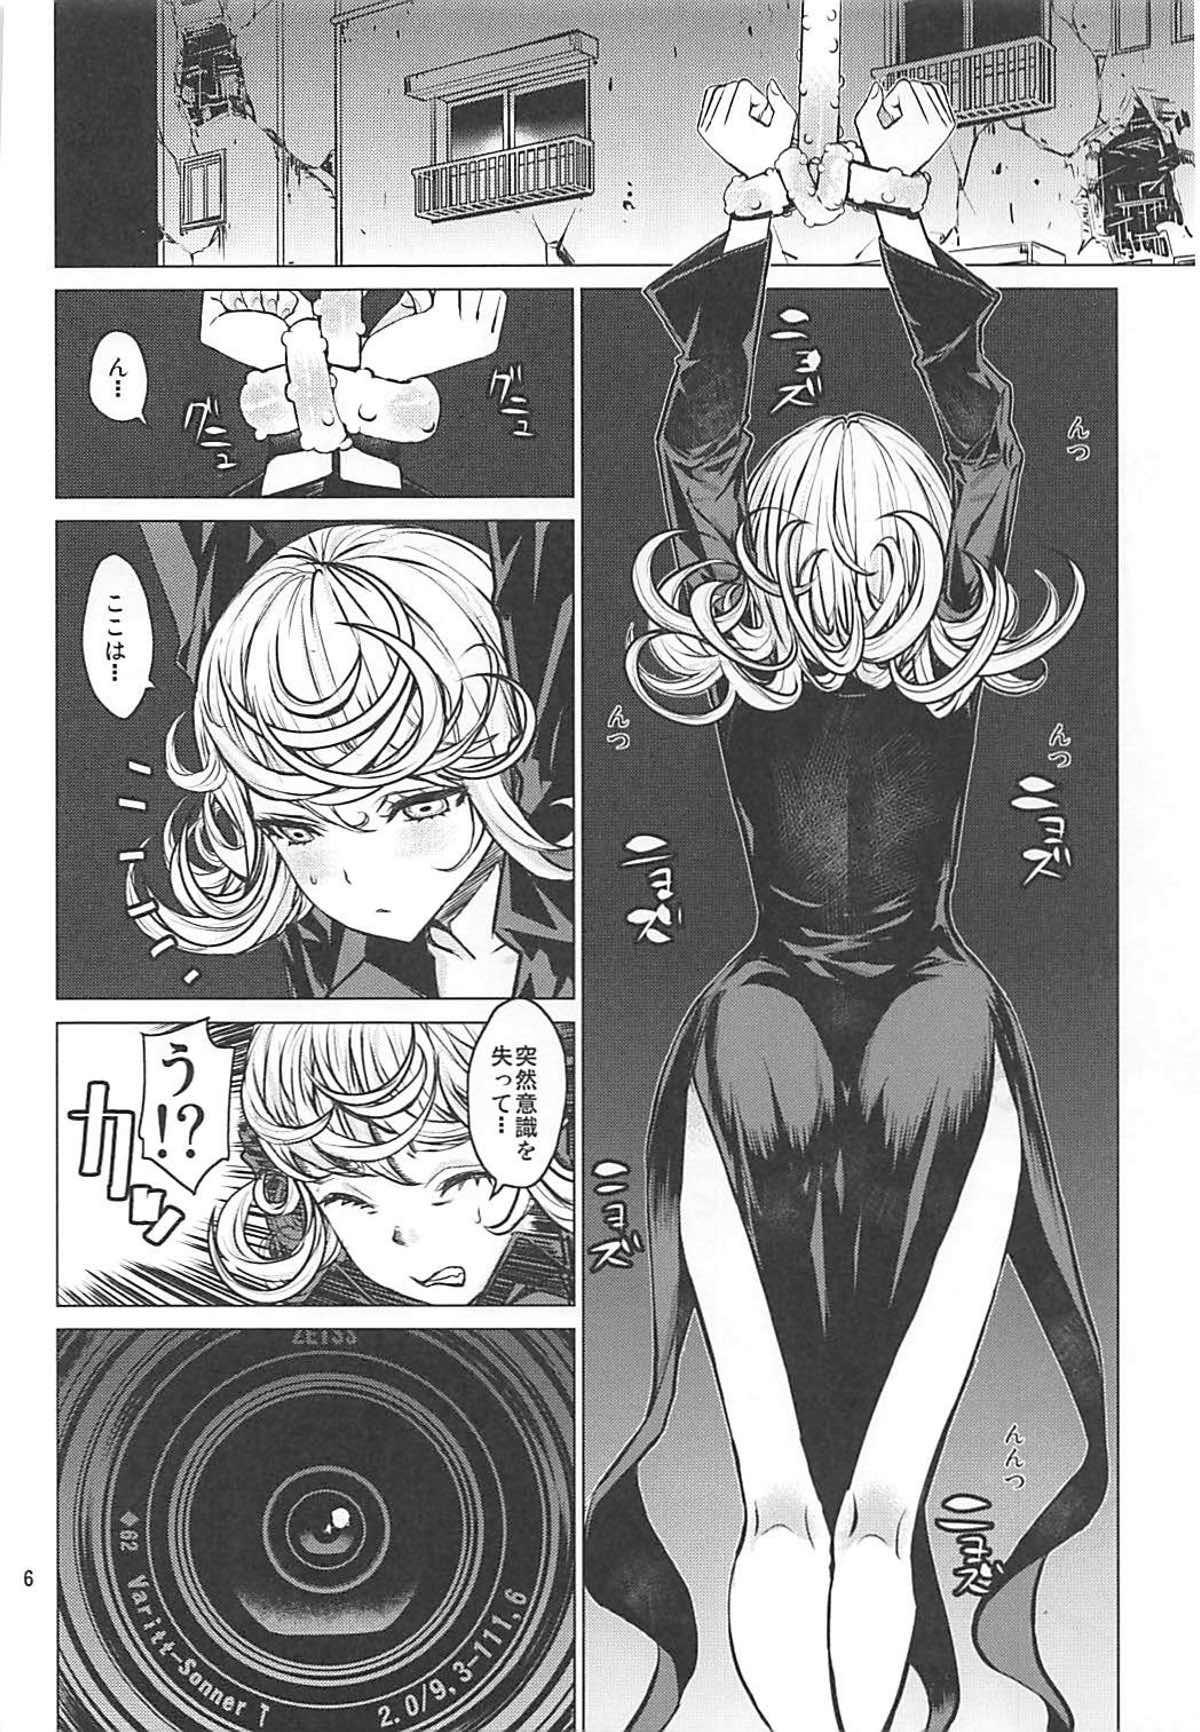 Russian Disaster Sisters Leopard Hon 25 - One punch man Girlnextdoor - Page 5